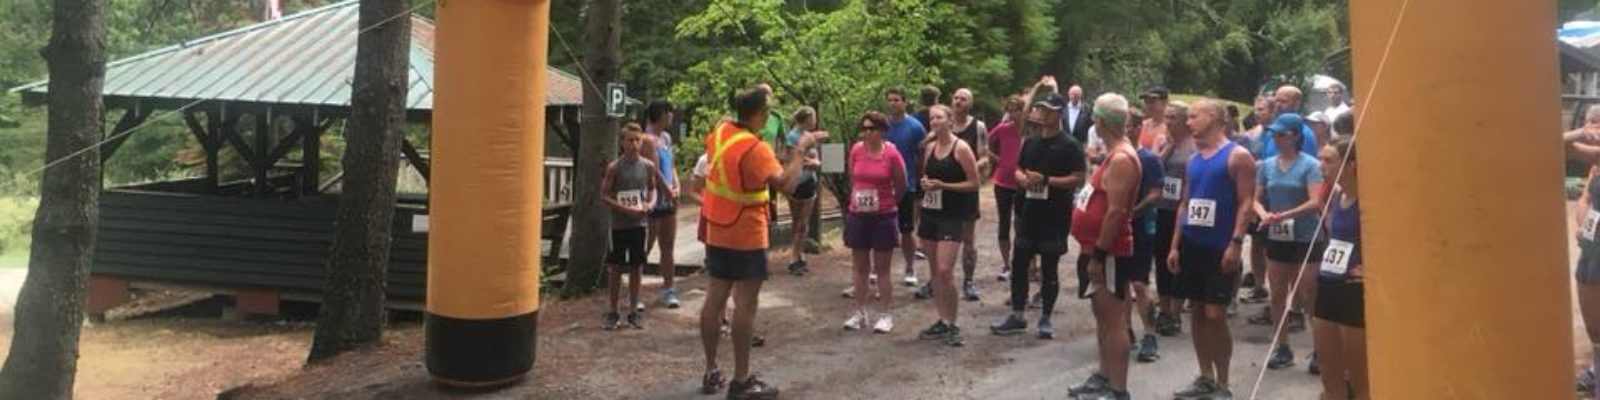 Four Lakes 10k - photo by Jamie Leveque